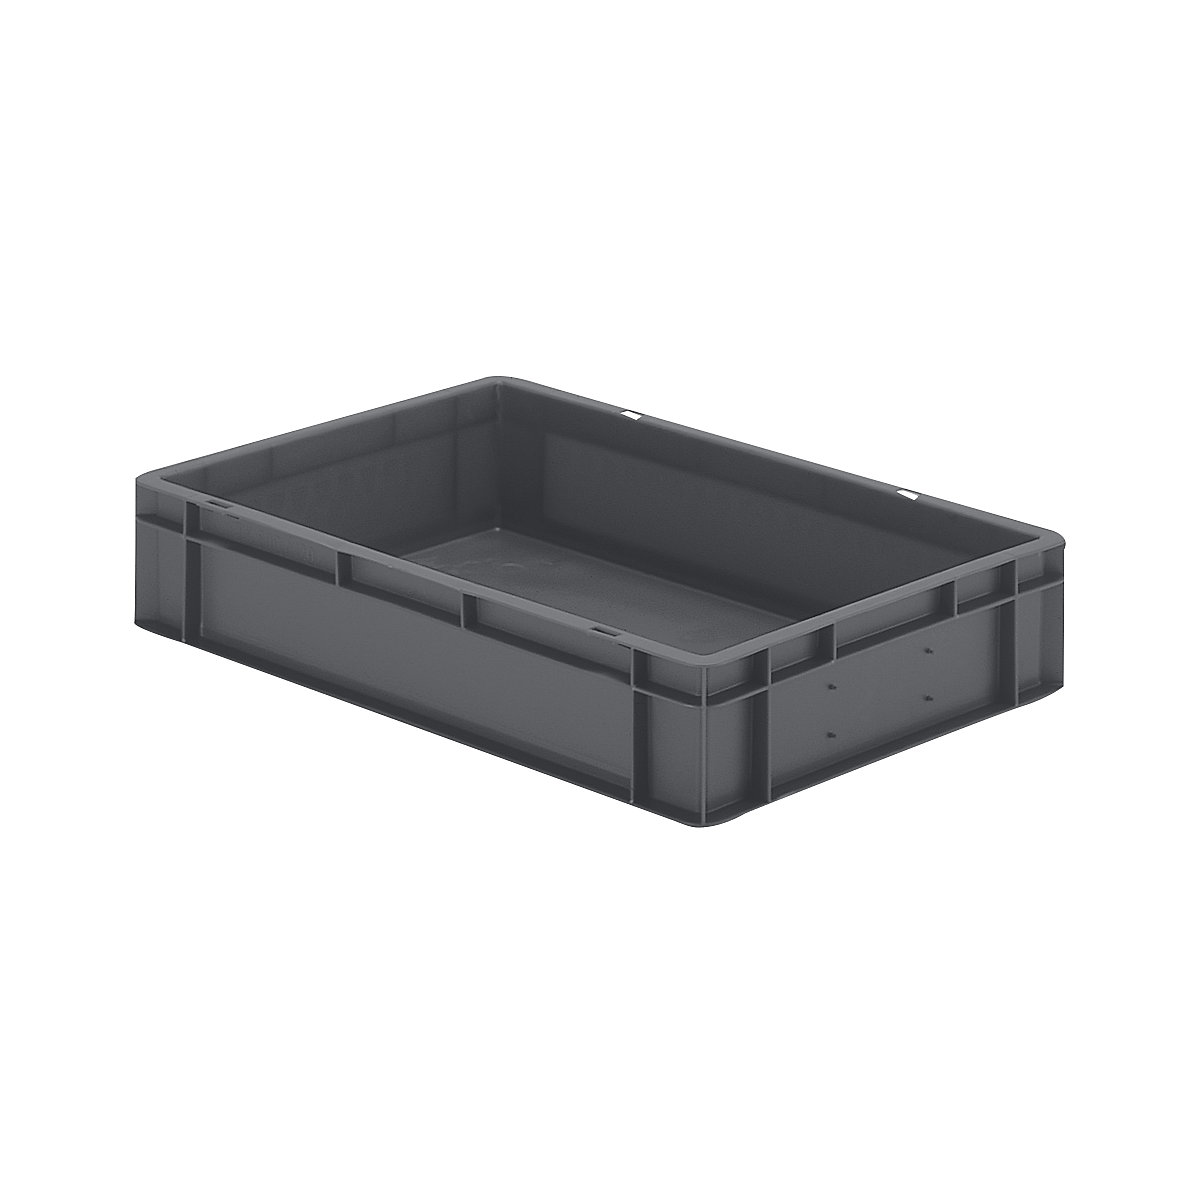 Euro stacking container, closed walls and base, LxWxH 600 x 400 x 120 mm, grey, pack of 5